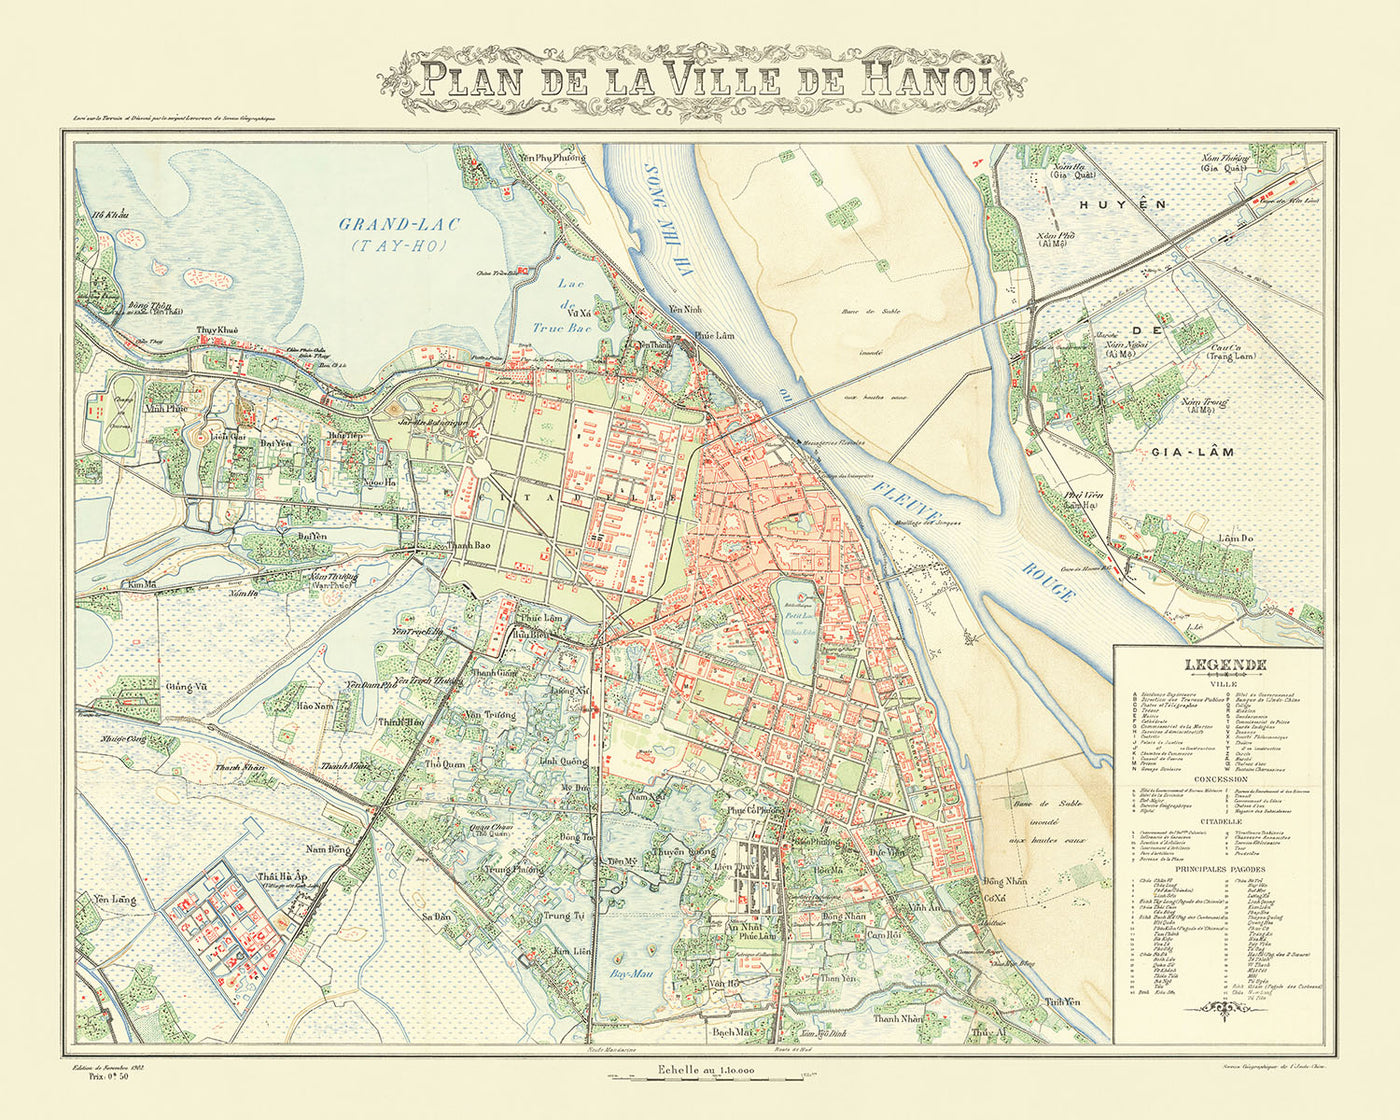 Old Map of Hanoi, 1902: Imperial City, Red River, Long Bien Bridge, Opera House, Temple of Literature